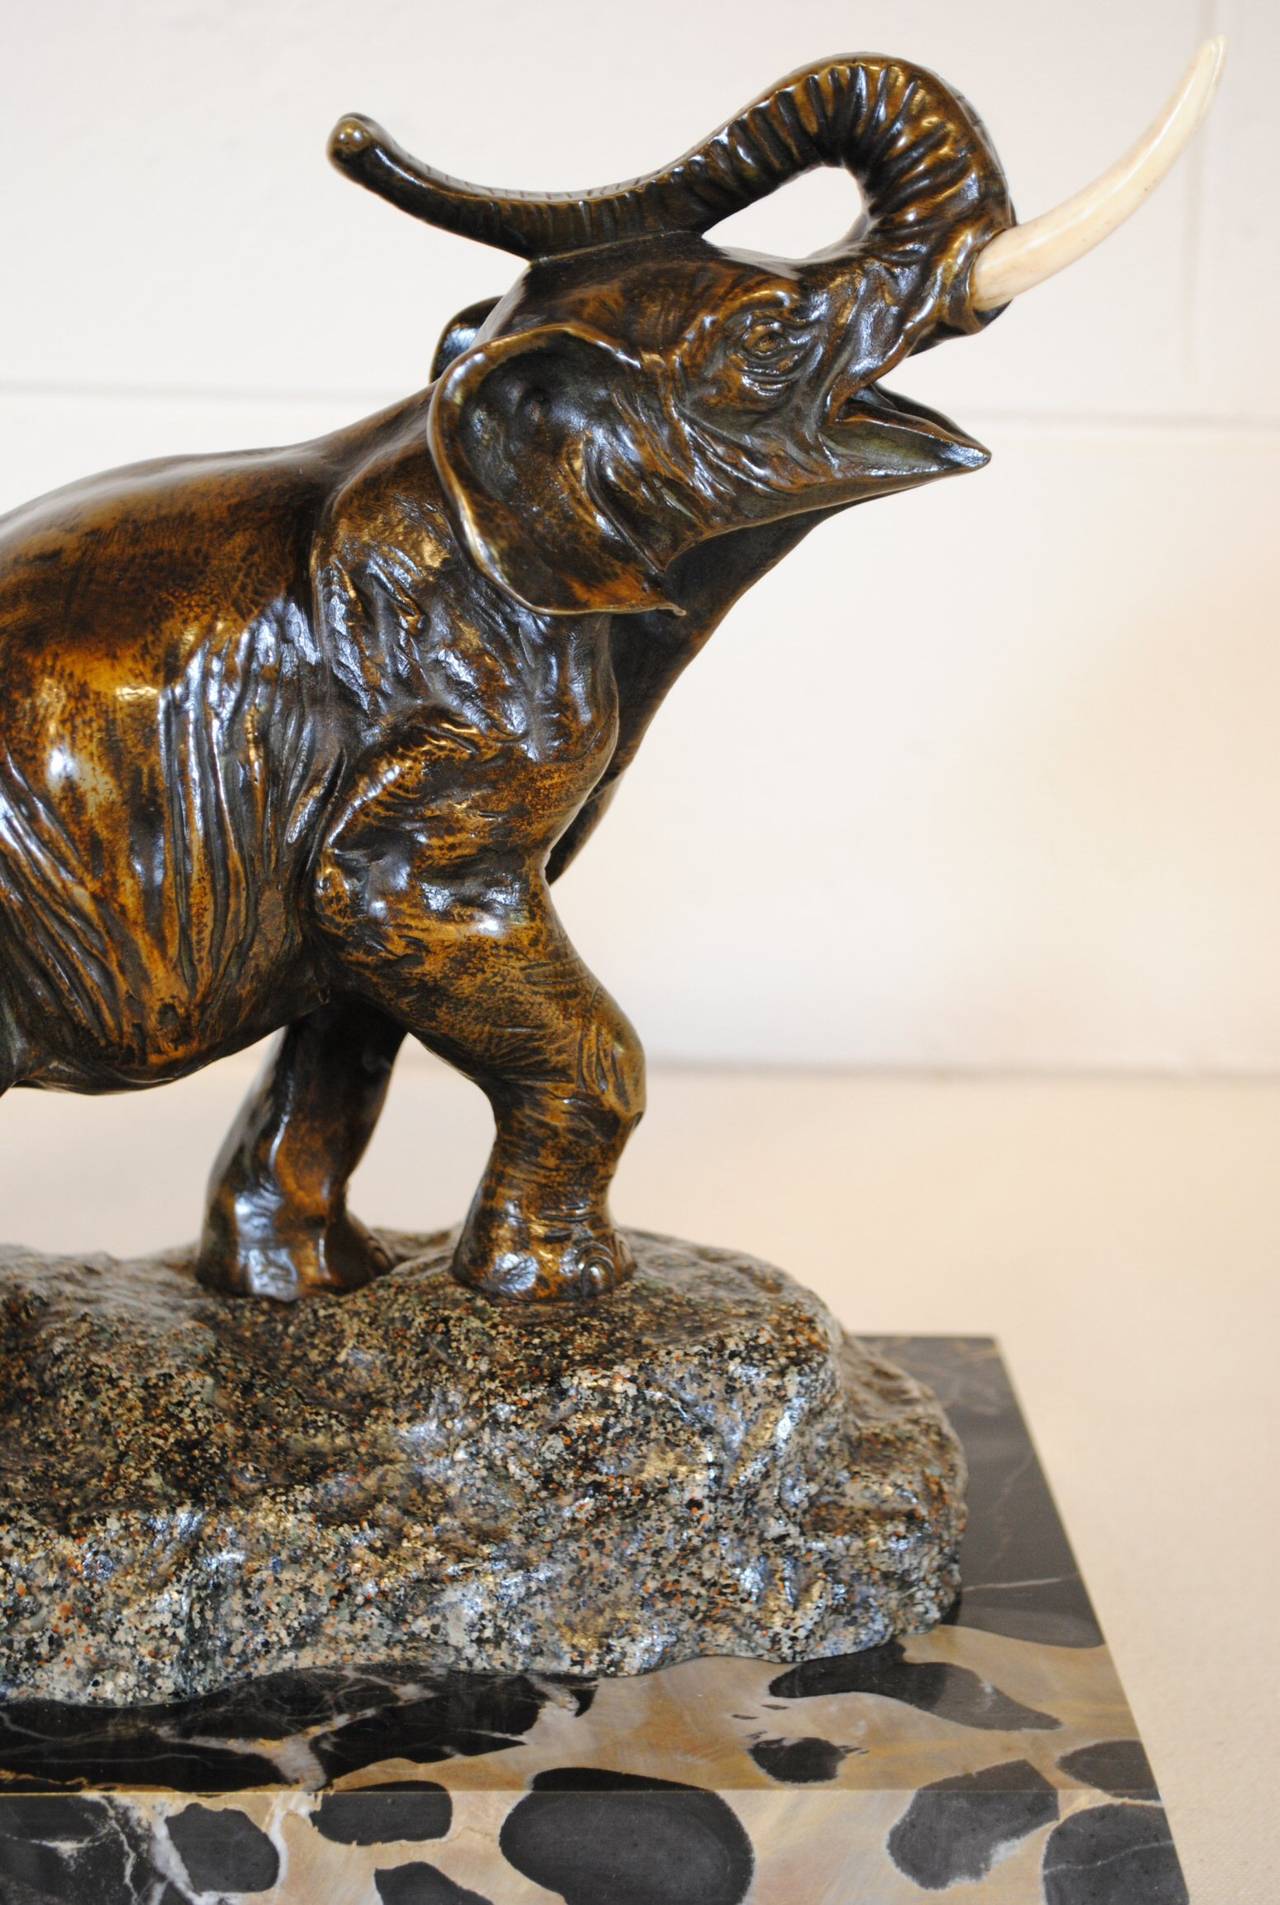 French Art Deco Period Bronze Signed Rochard In Excellent Condition For Sale In Armadale, Victoria